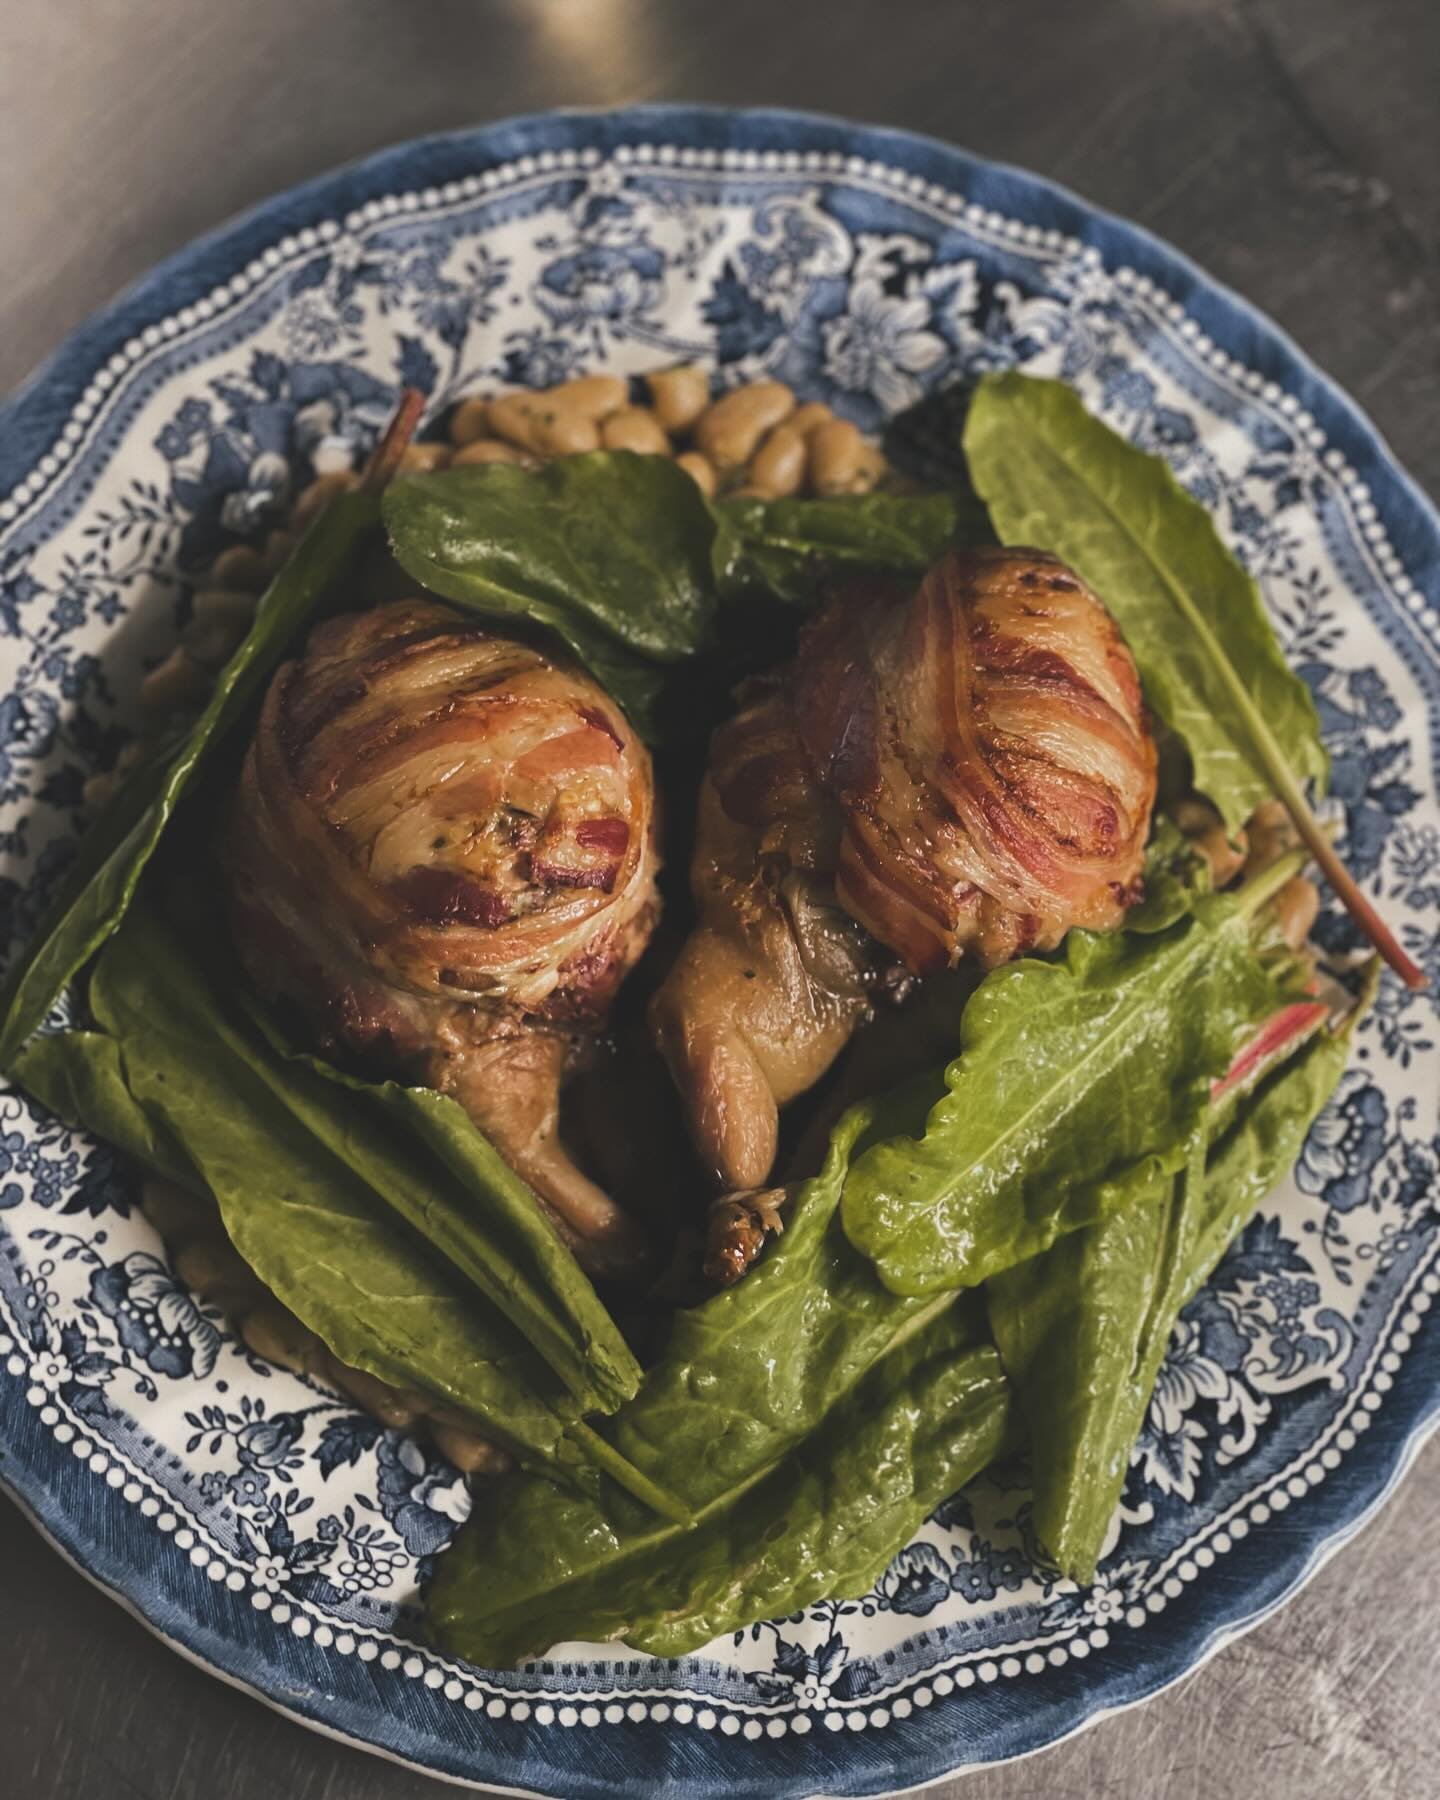 Two Boned &amp; Stuffed Norfolk Quail with White Beans, Sorrel and a Sherry Sauce to share. 

The quail are stuffed with our black pudding, livers and chicken mousse. A real treat for two by the fire on a brisk Sunday afternoon.